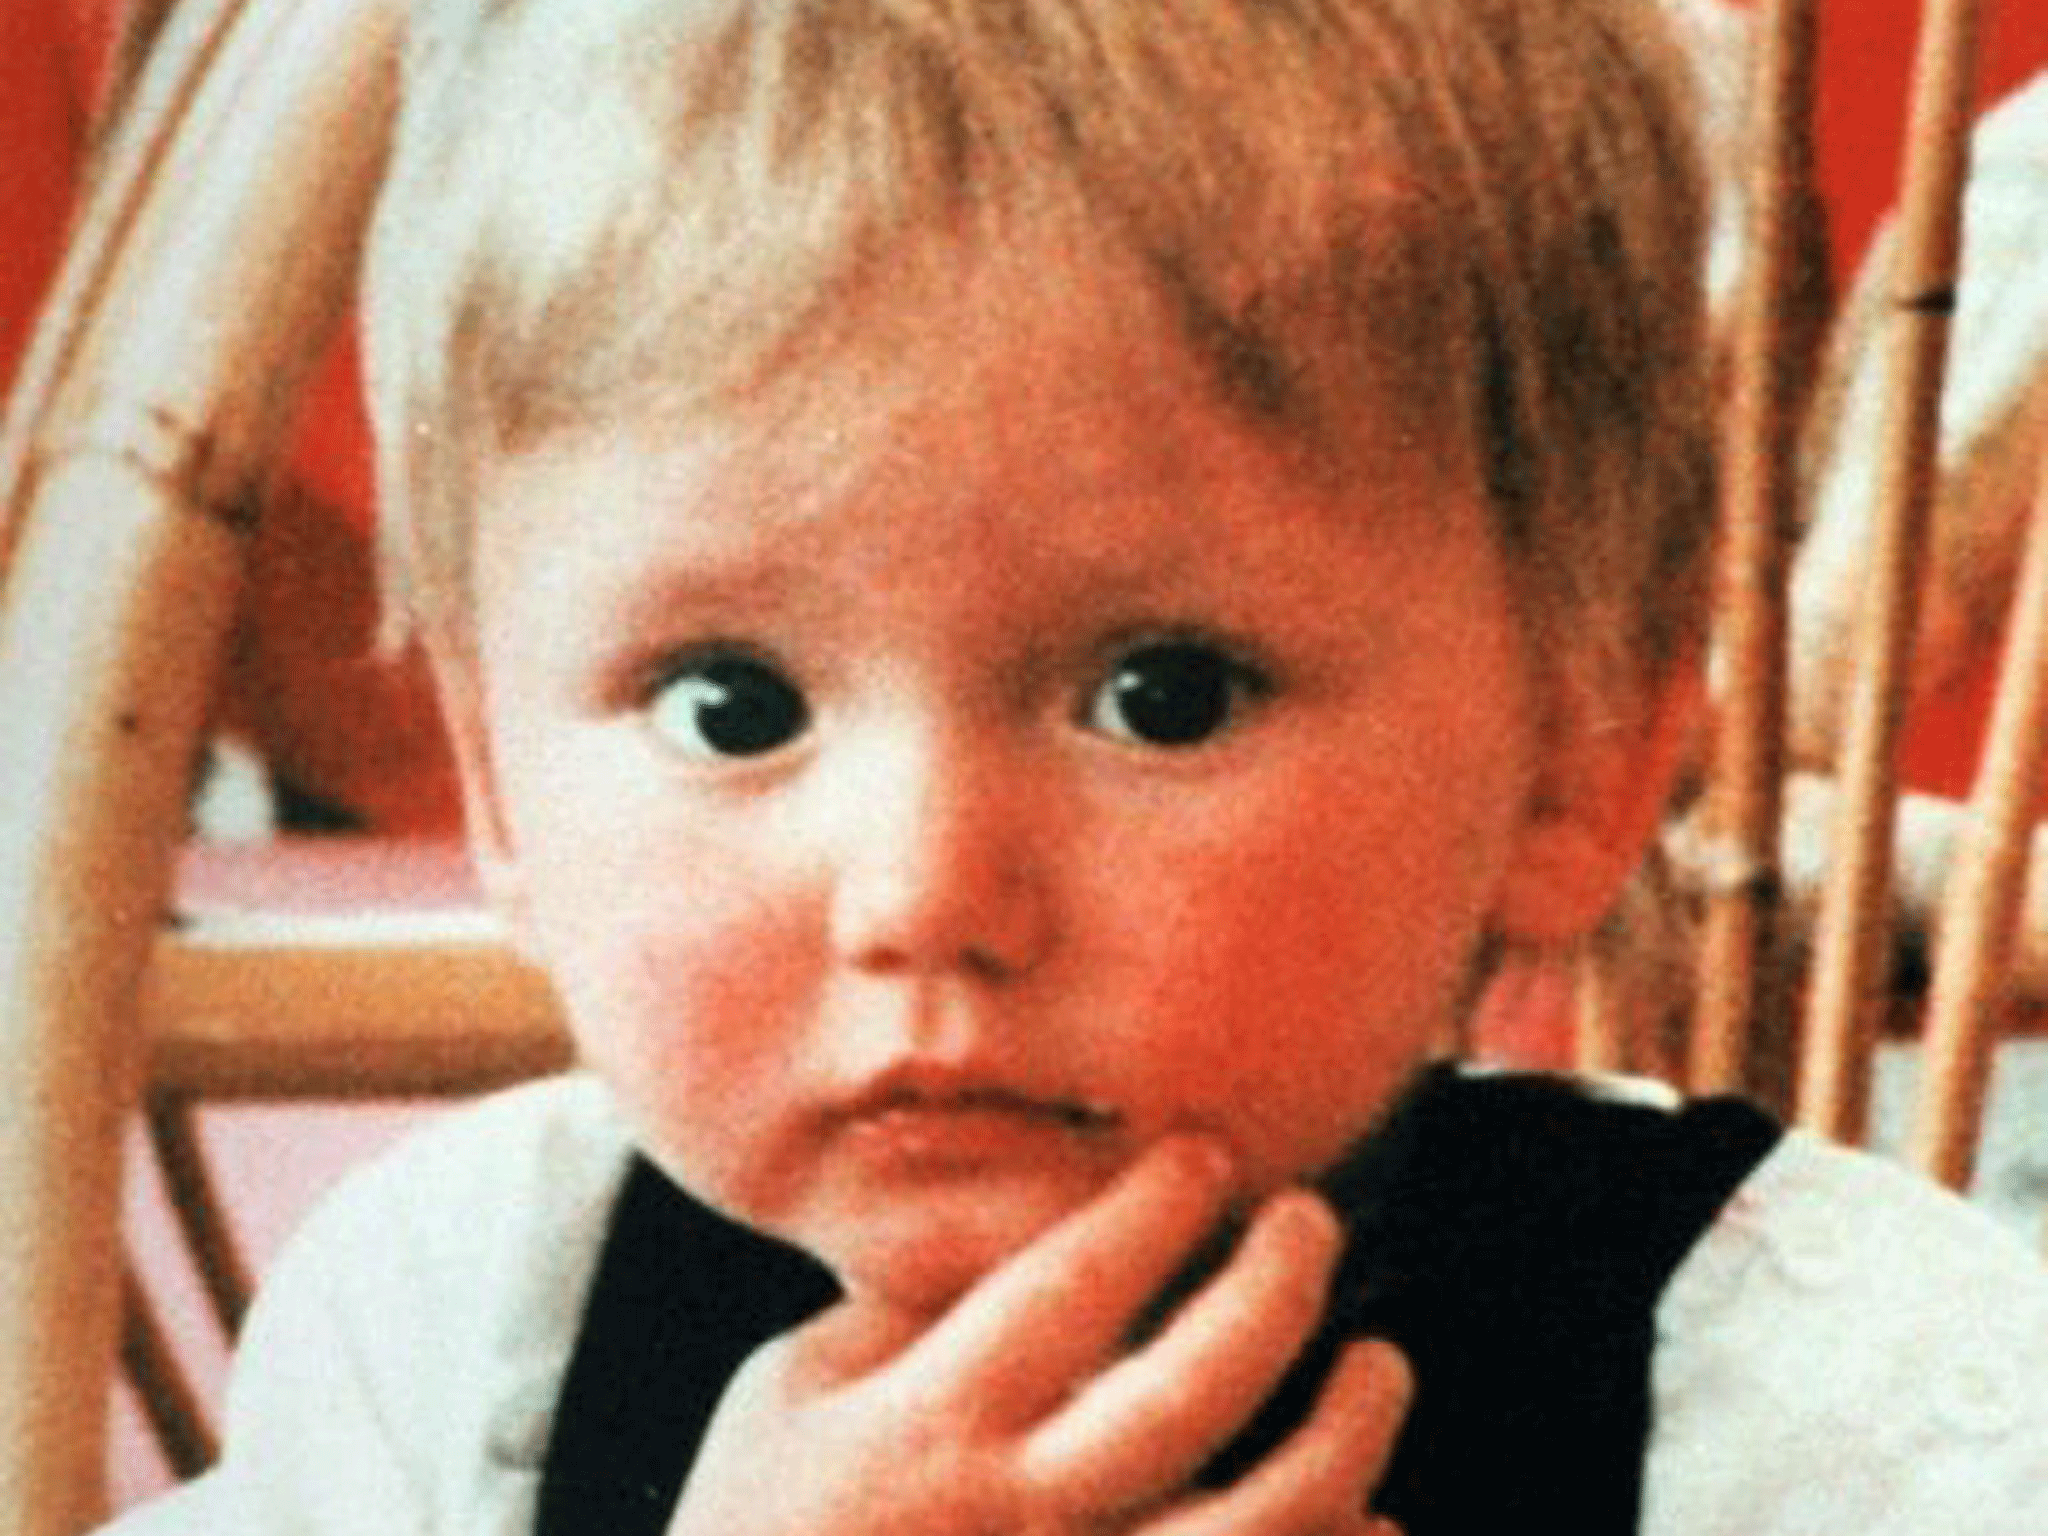 Read more

Who is Ben Needham and what happened to him?